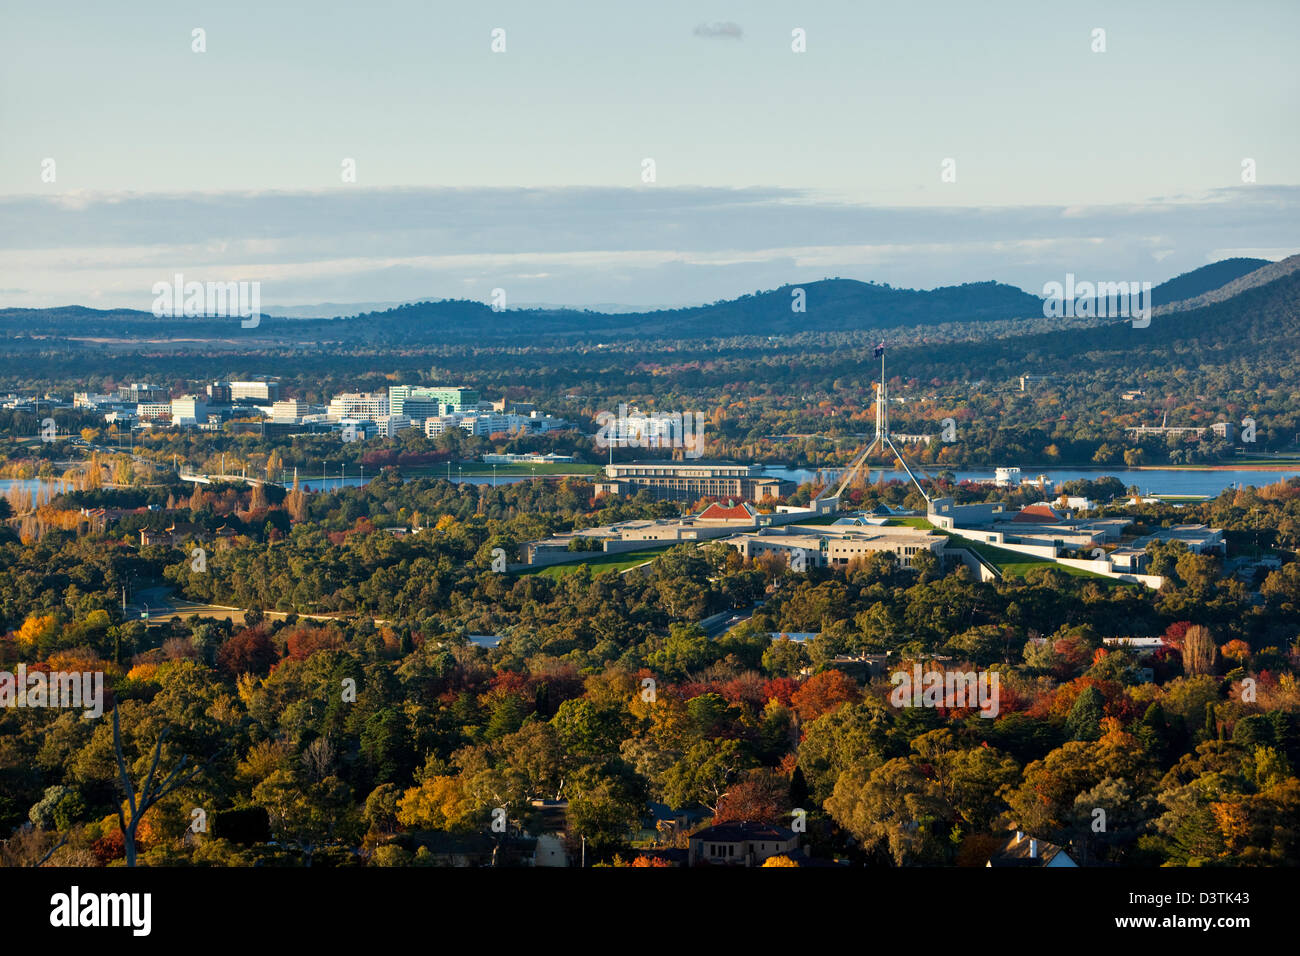 View of Parliament and city skyline from Red Hill lookout. Canberra, Australian Capital Territory (ACT), Australia Stock Photo